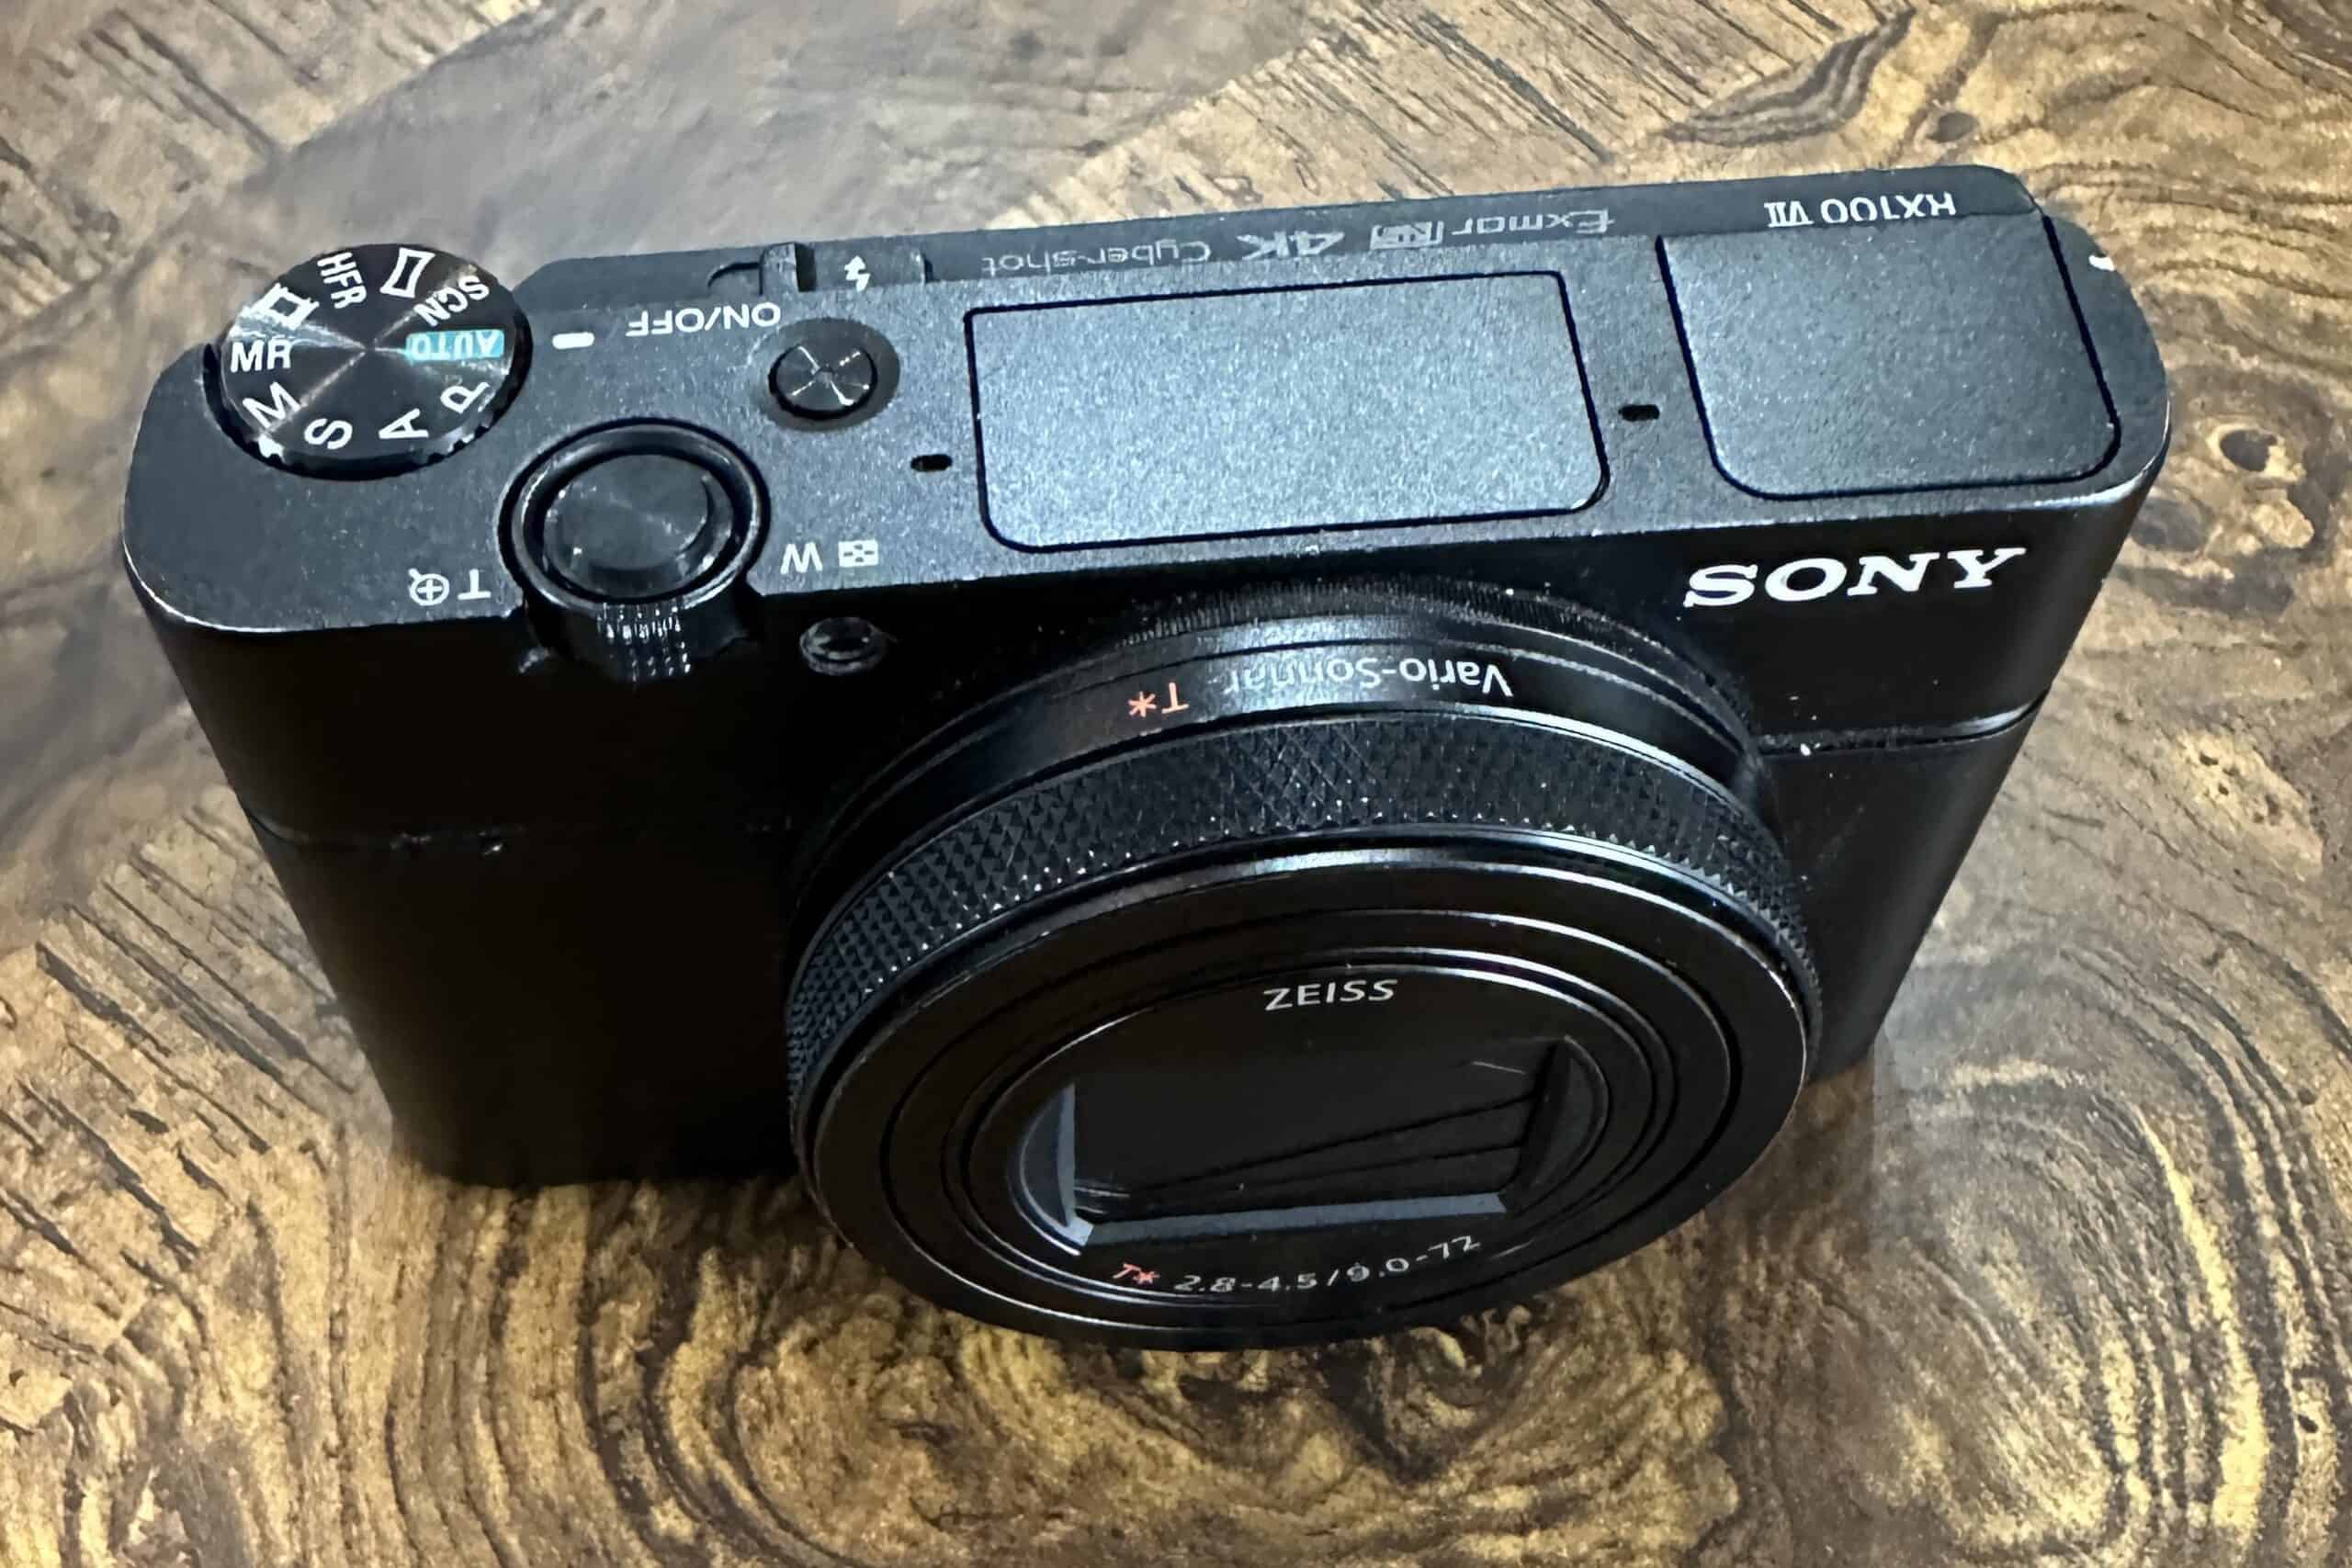 Sony RX100 VII , a convenient but high quality travel camera